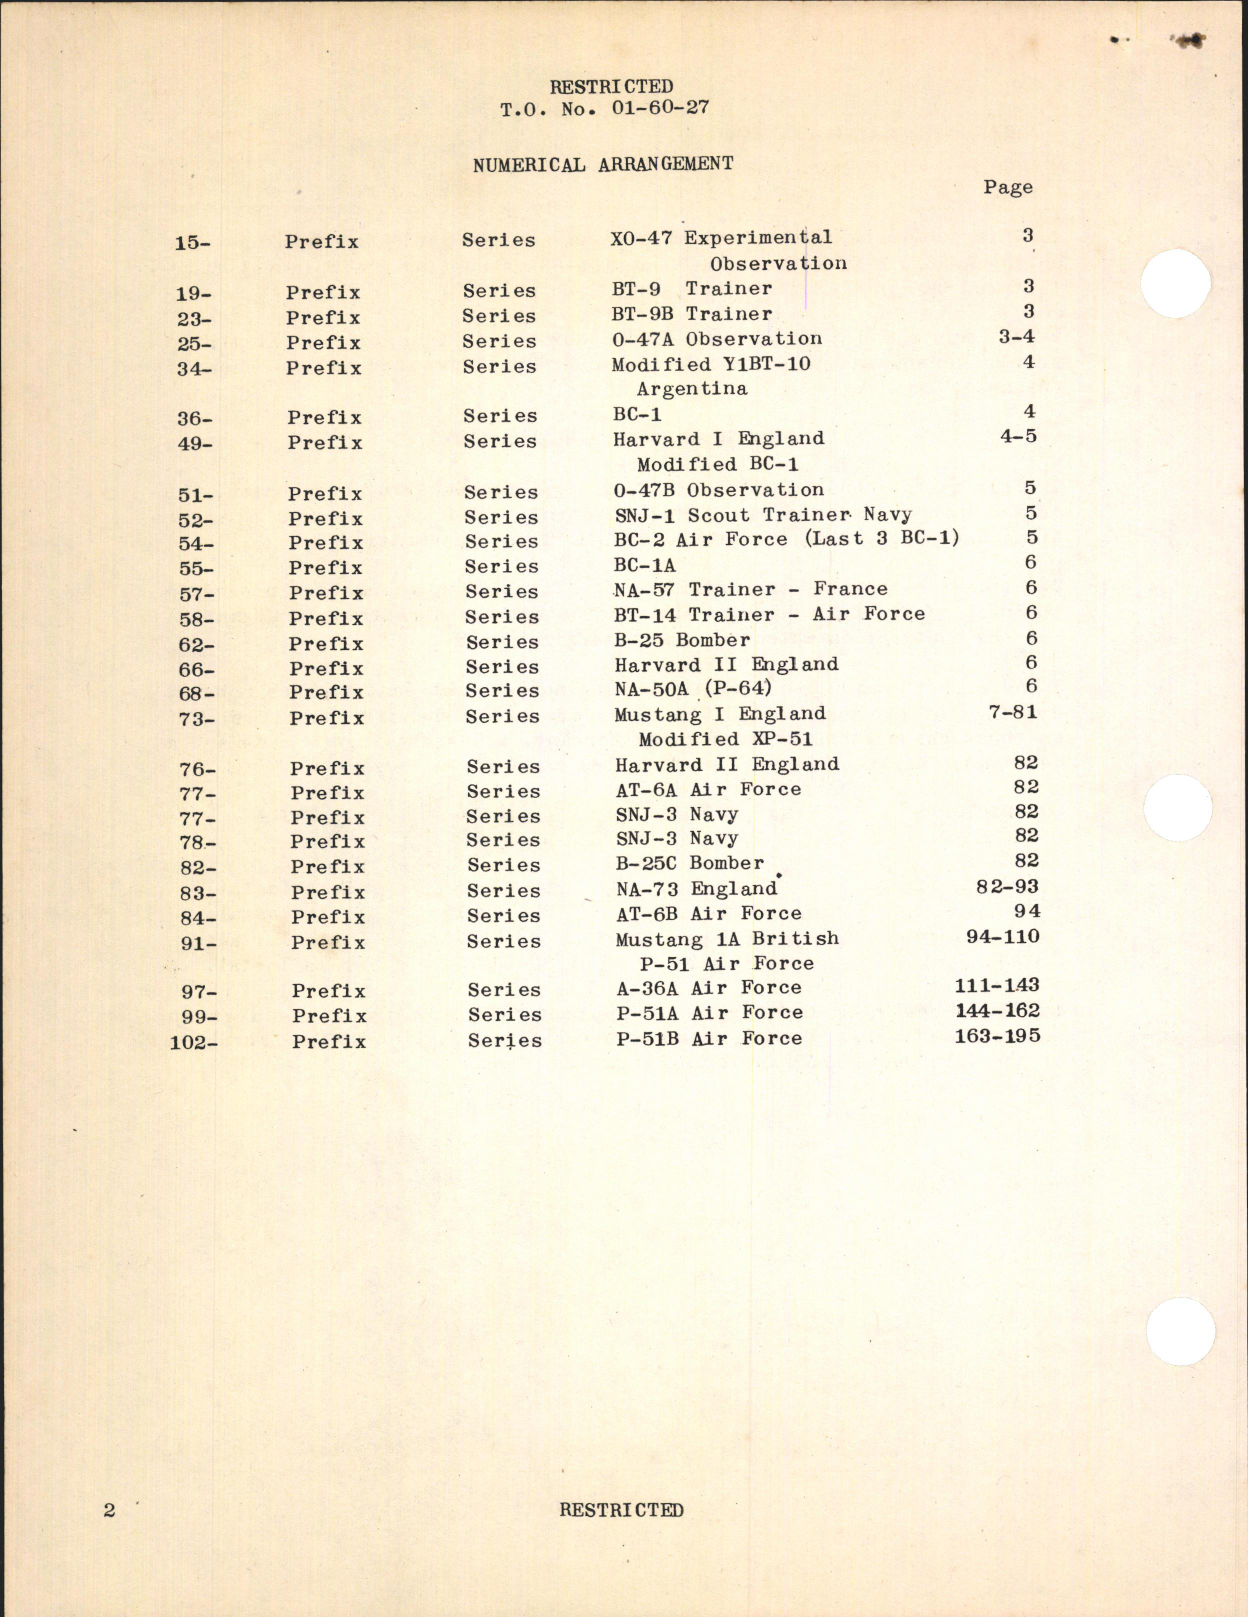 Sample page 6 from AirCorps Library document: Interchangeable Parts List for A-36A, P-51 Series, and Mustang I Airplanes